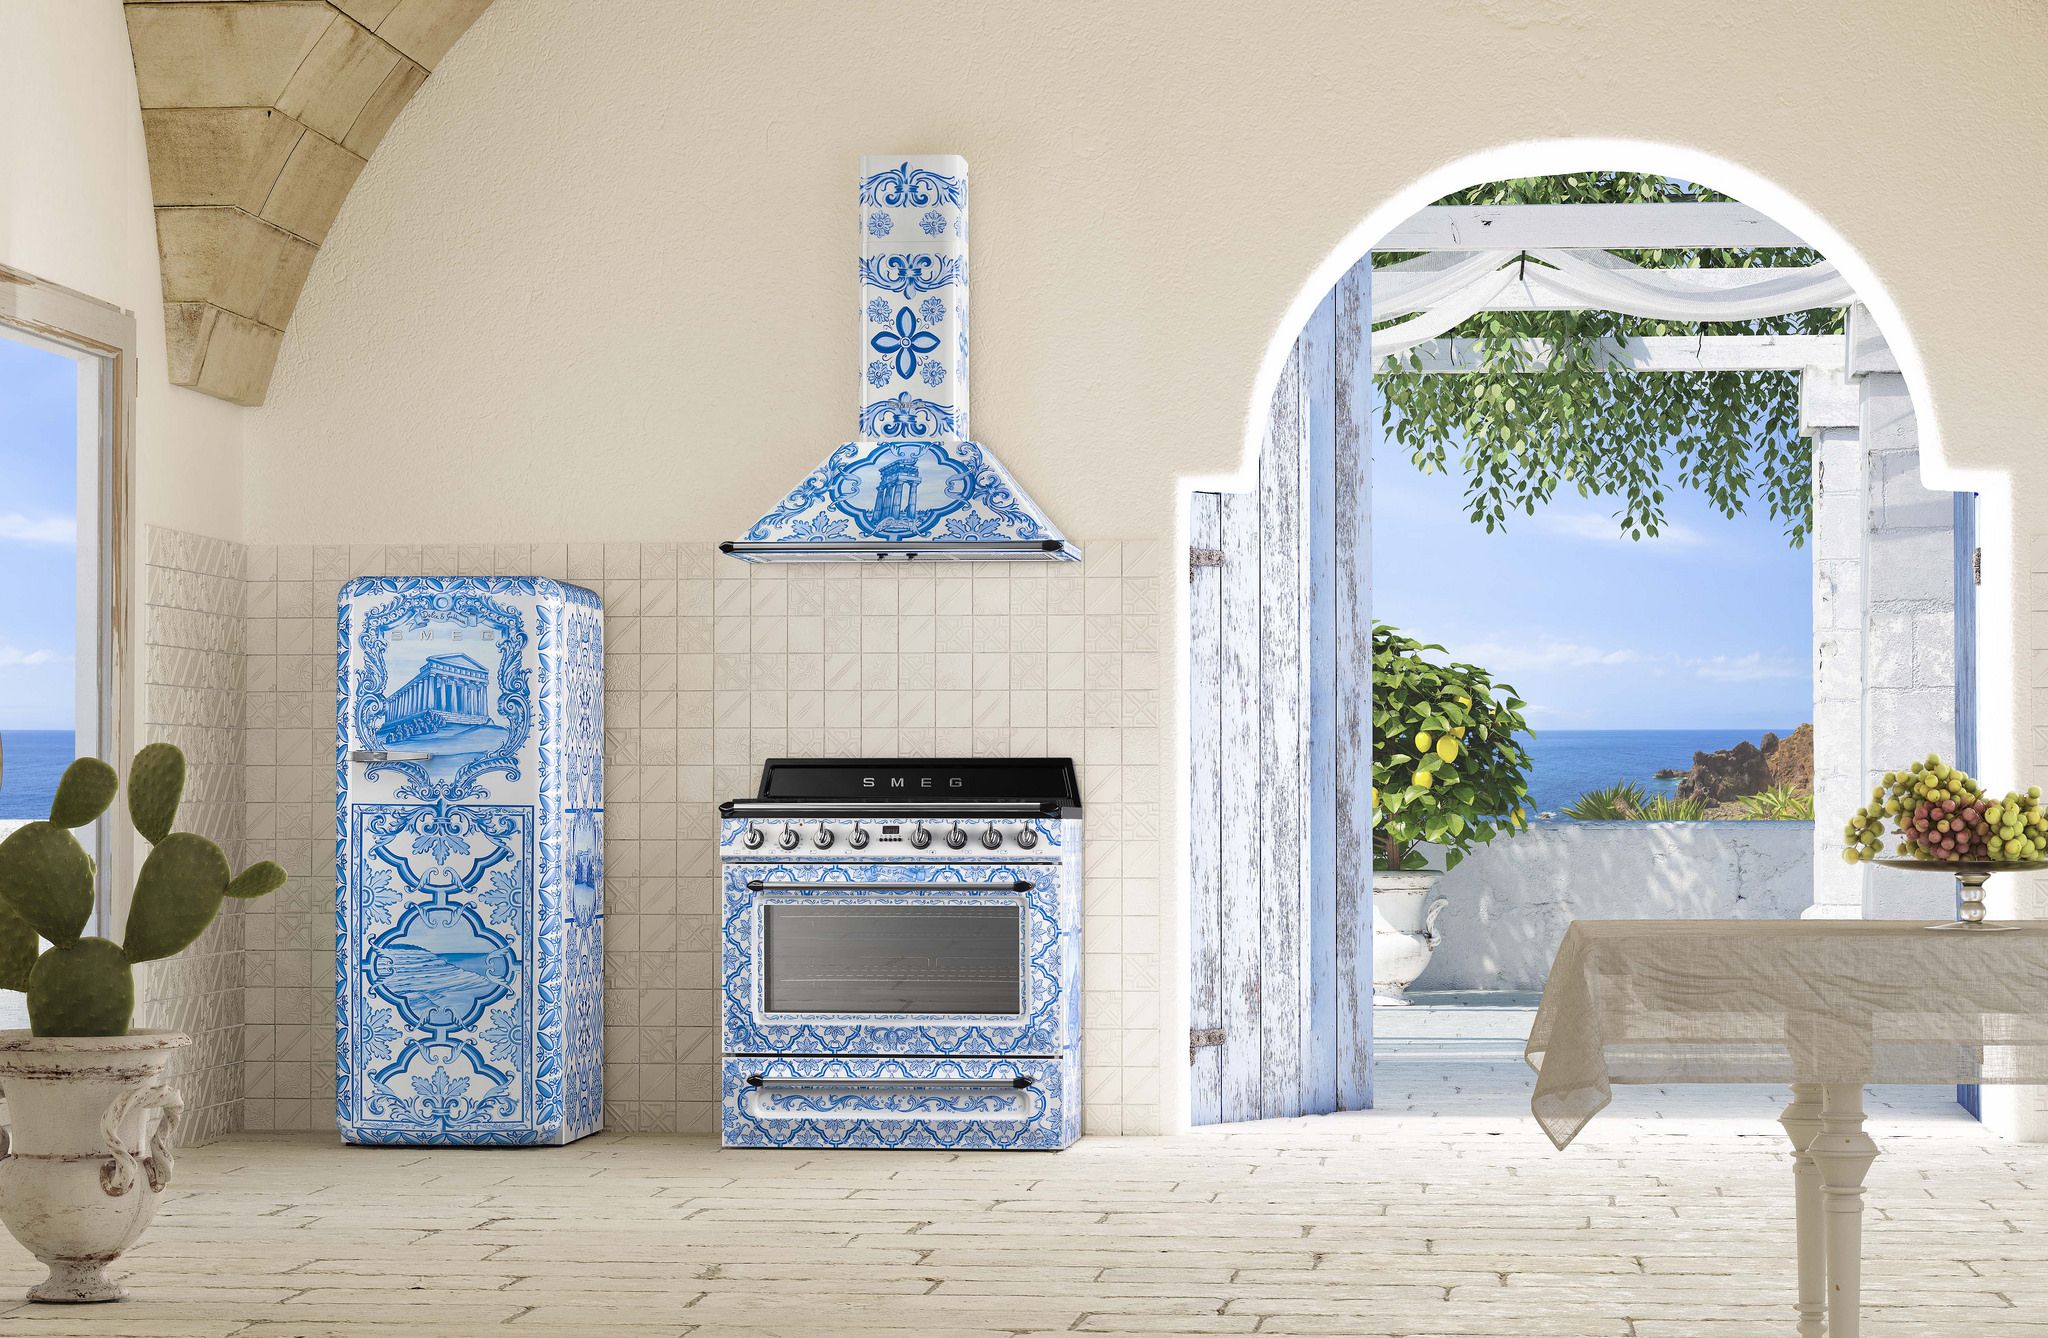 Get a Smeg and Dolce & Gabbana Kitchen With Their Divina Cucina Cooker Range